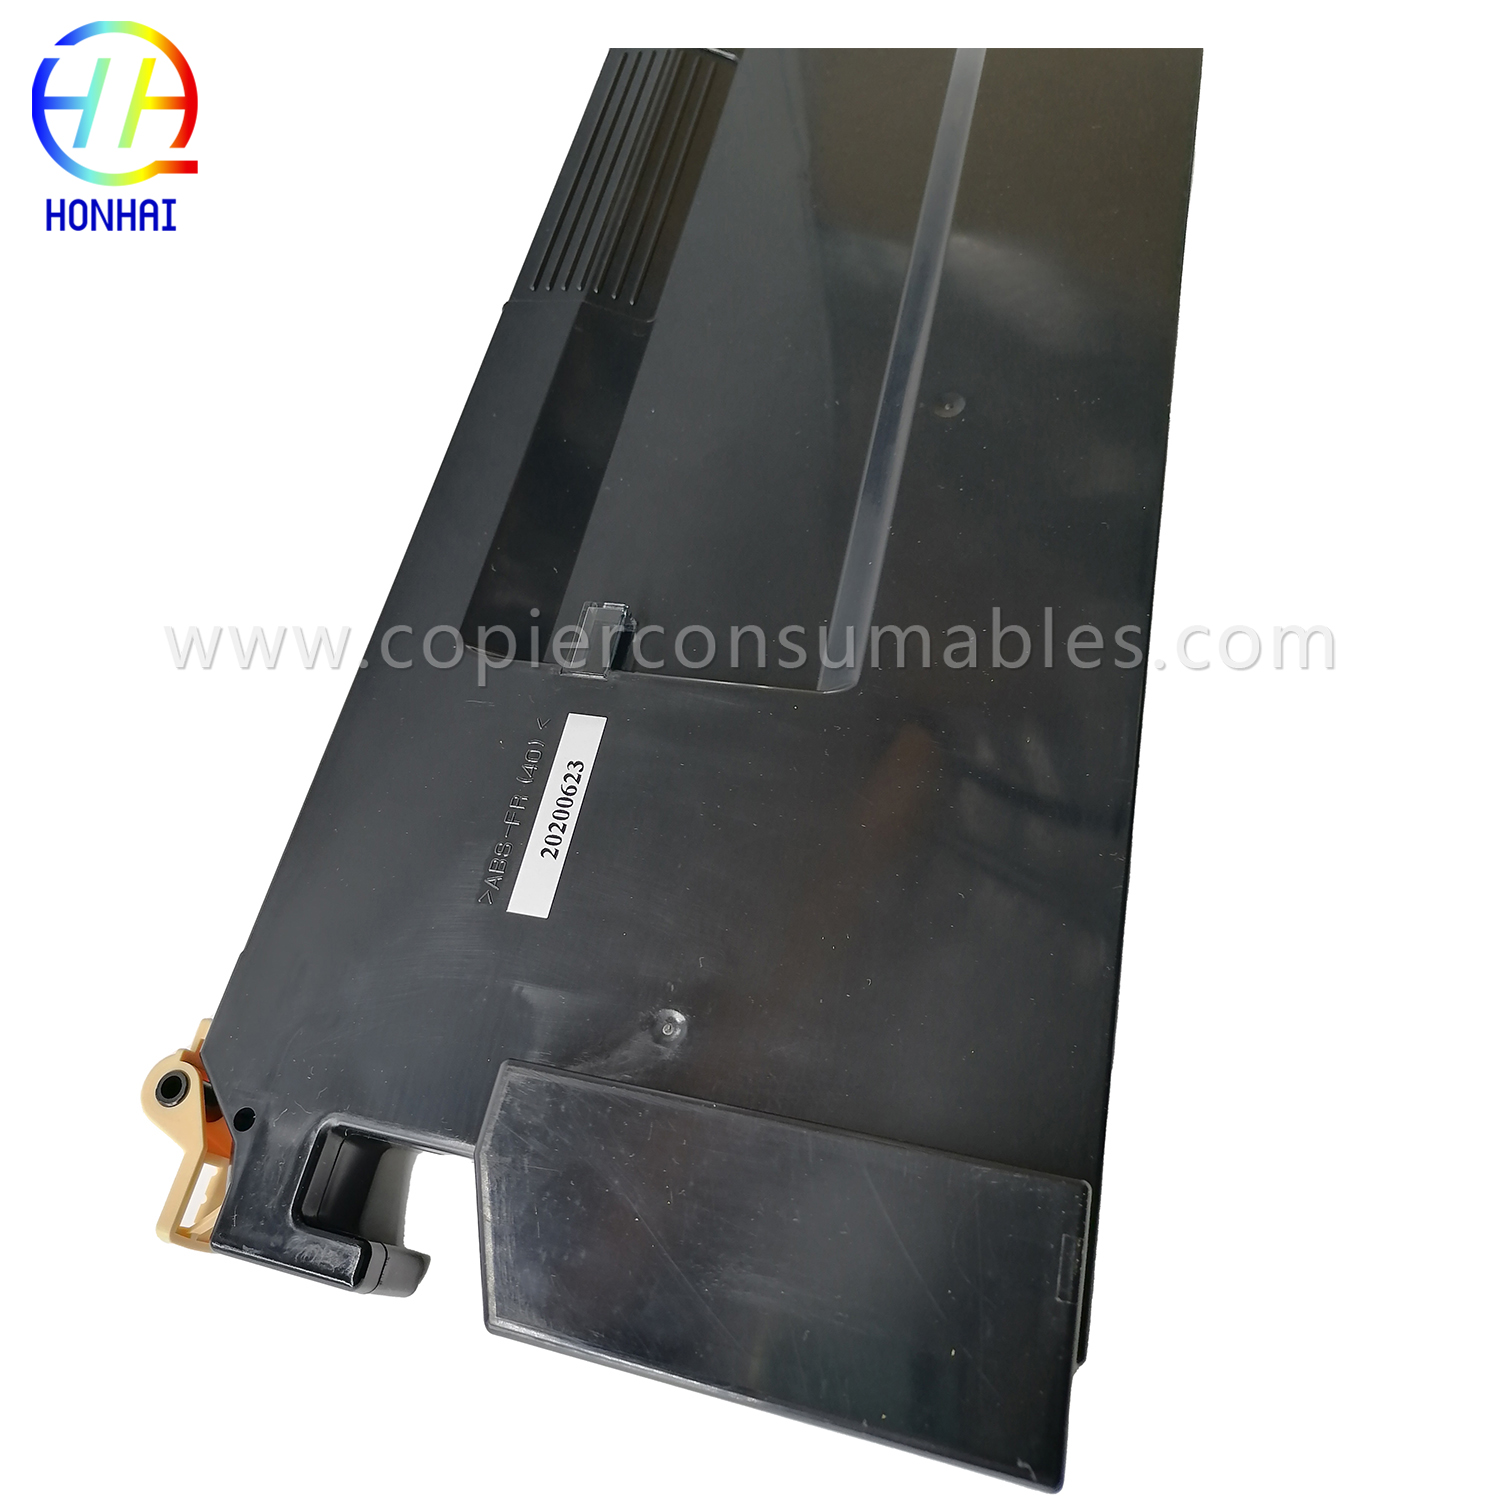 Waste Toner Container for Xerox 4110 4127 4590 4595 D110 D125 D136 D95 ED125 ED95A 008R13036(6) 拷贝